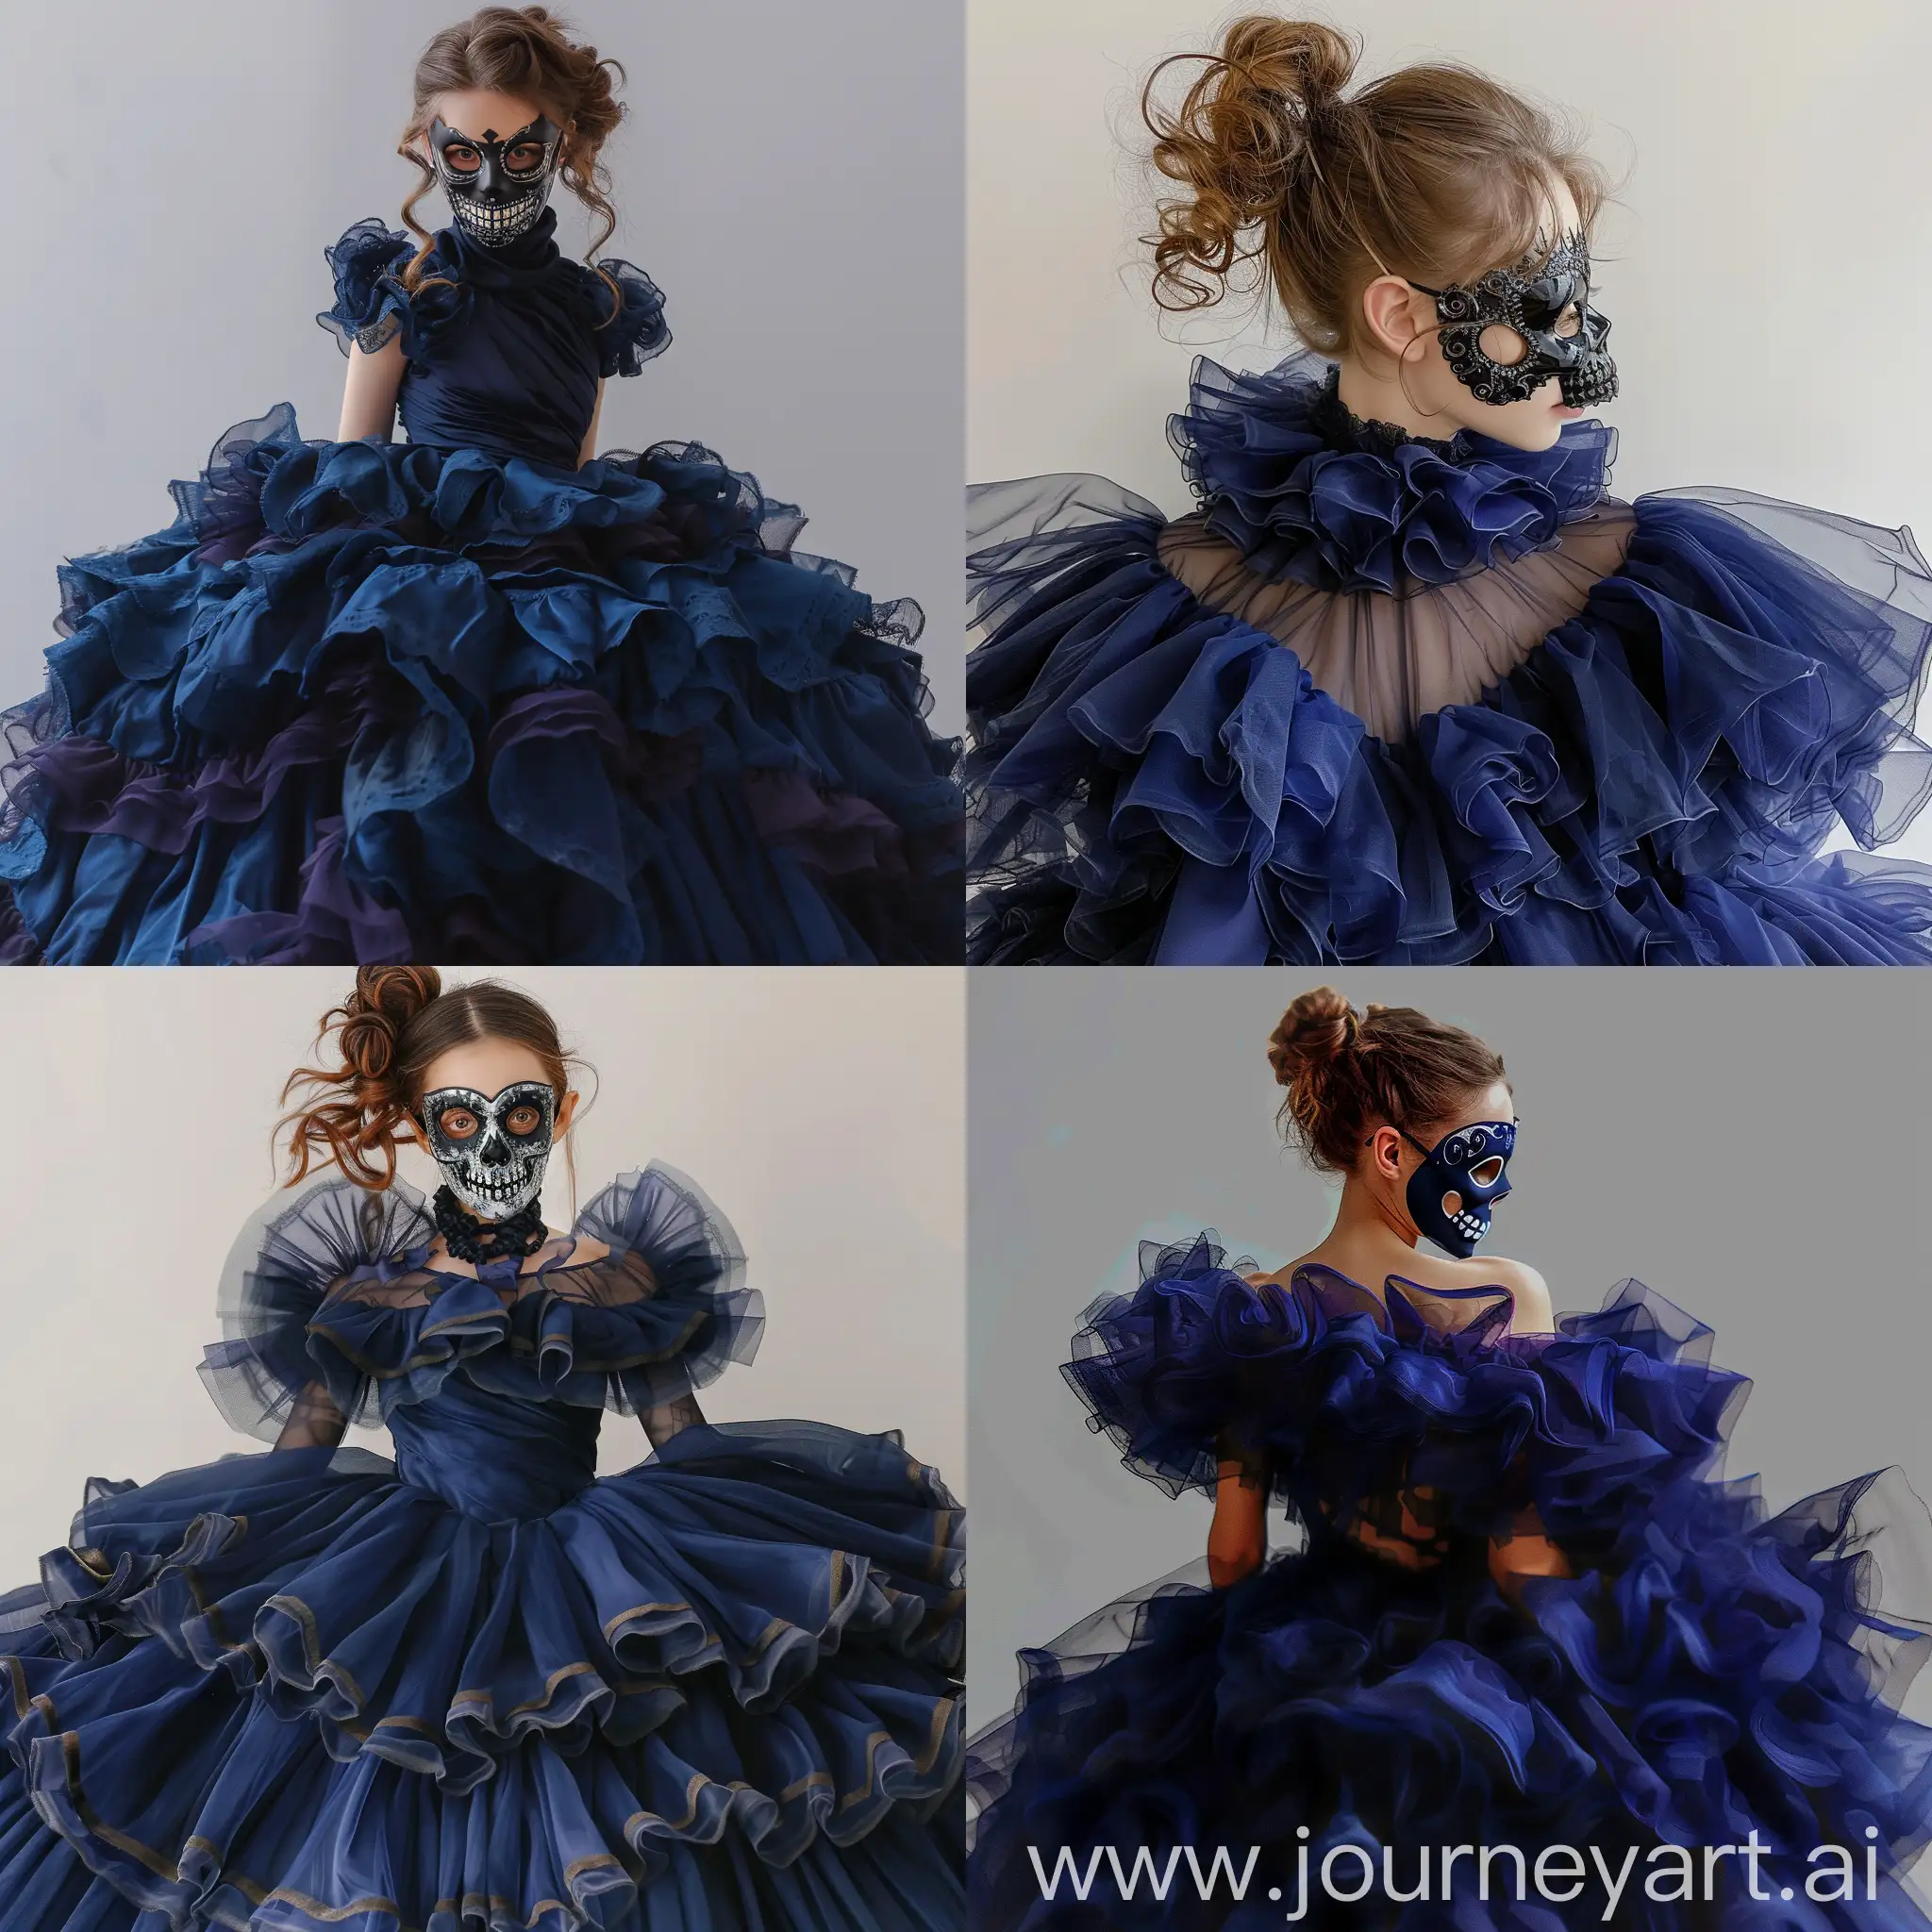 Ethereal-Carnival-Princess-in-Mysterious-Blue-Gown-with-Skull-Mask